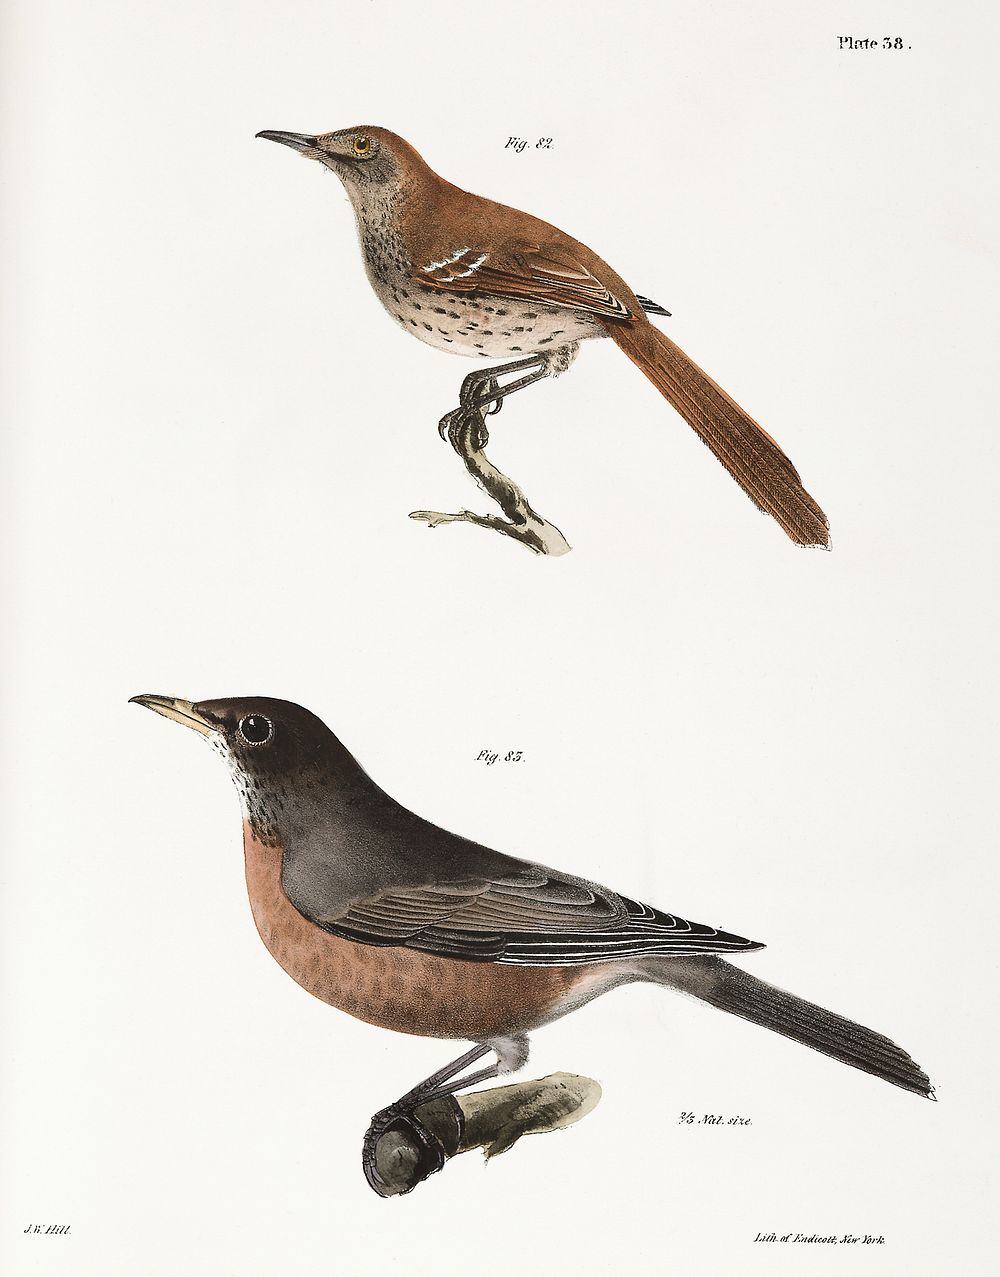 82. The Brown Thrush (Orpheus rufus) 83. The American Robin (Merula migratoria) illustration from Zoology of New York…